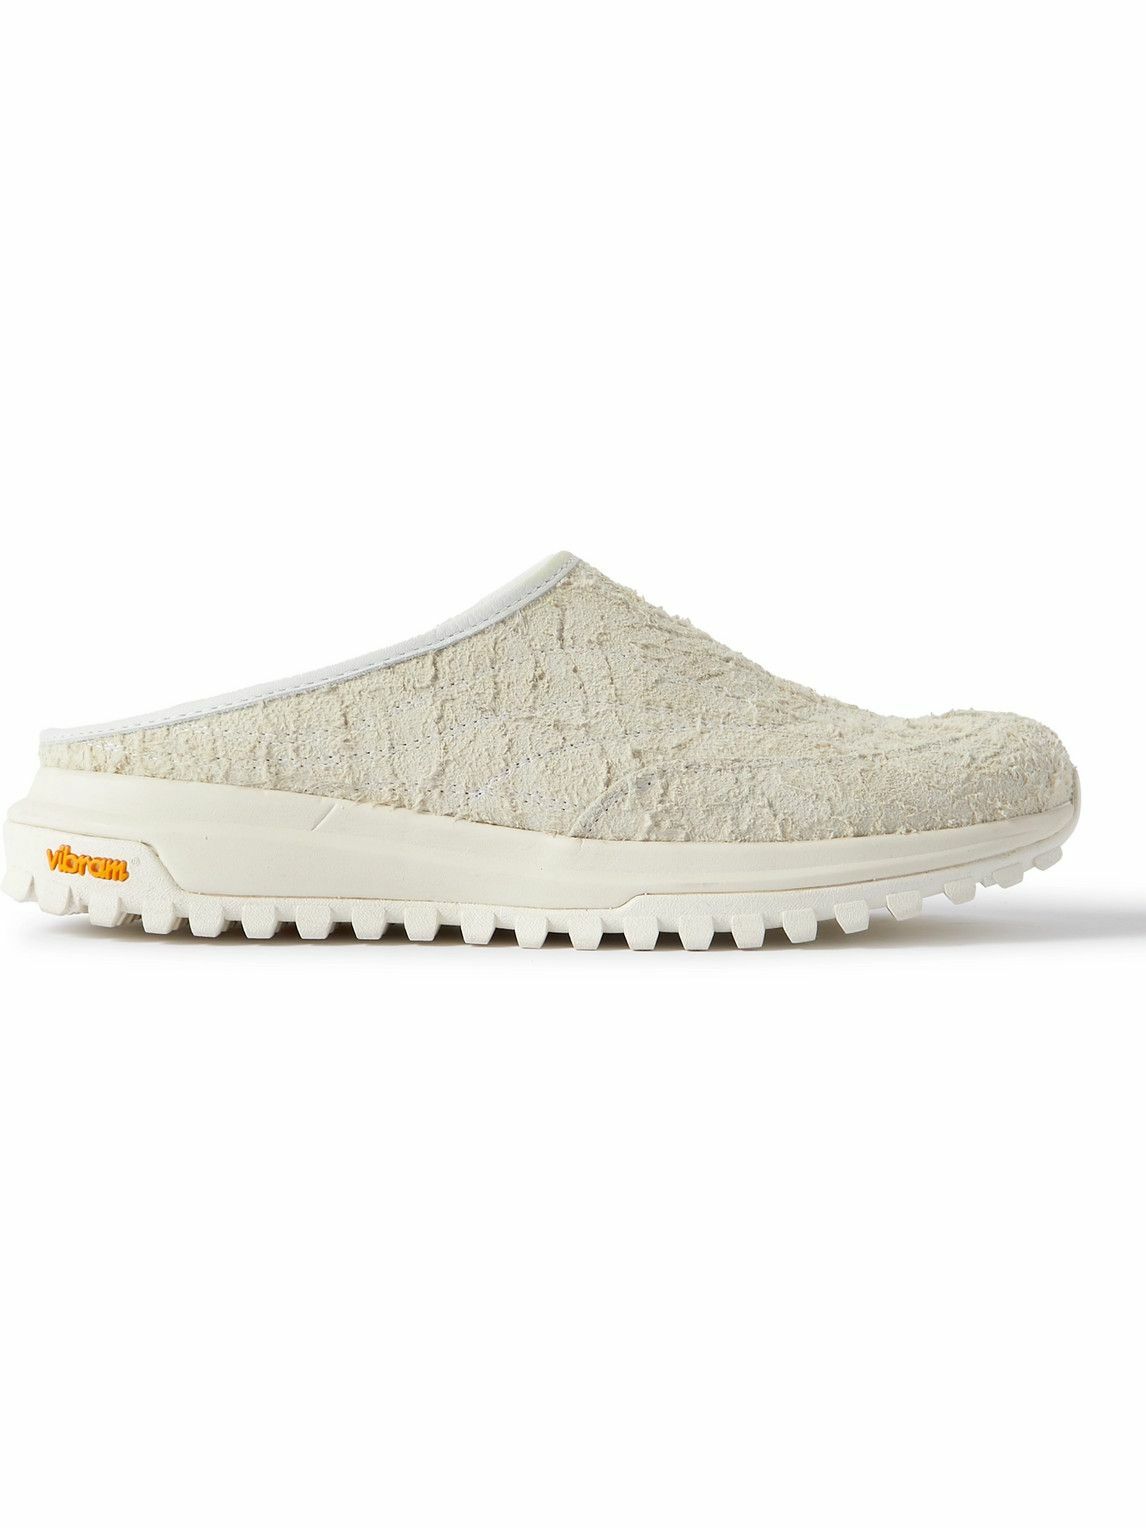 Photo: Diemme - Maggiore Cracked-Suede Slip-On Sneakers - White